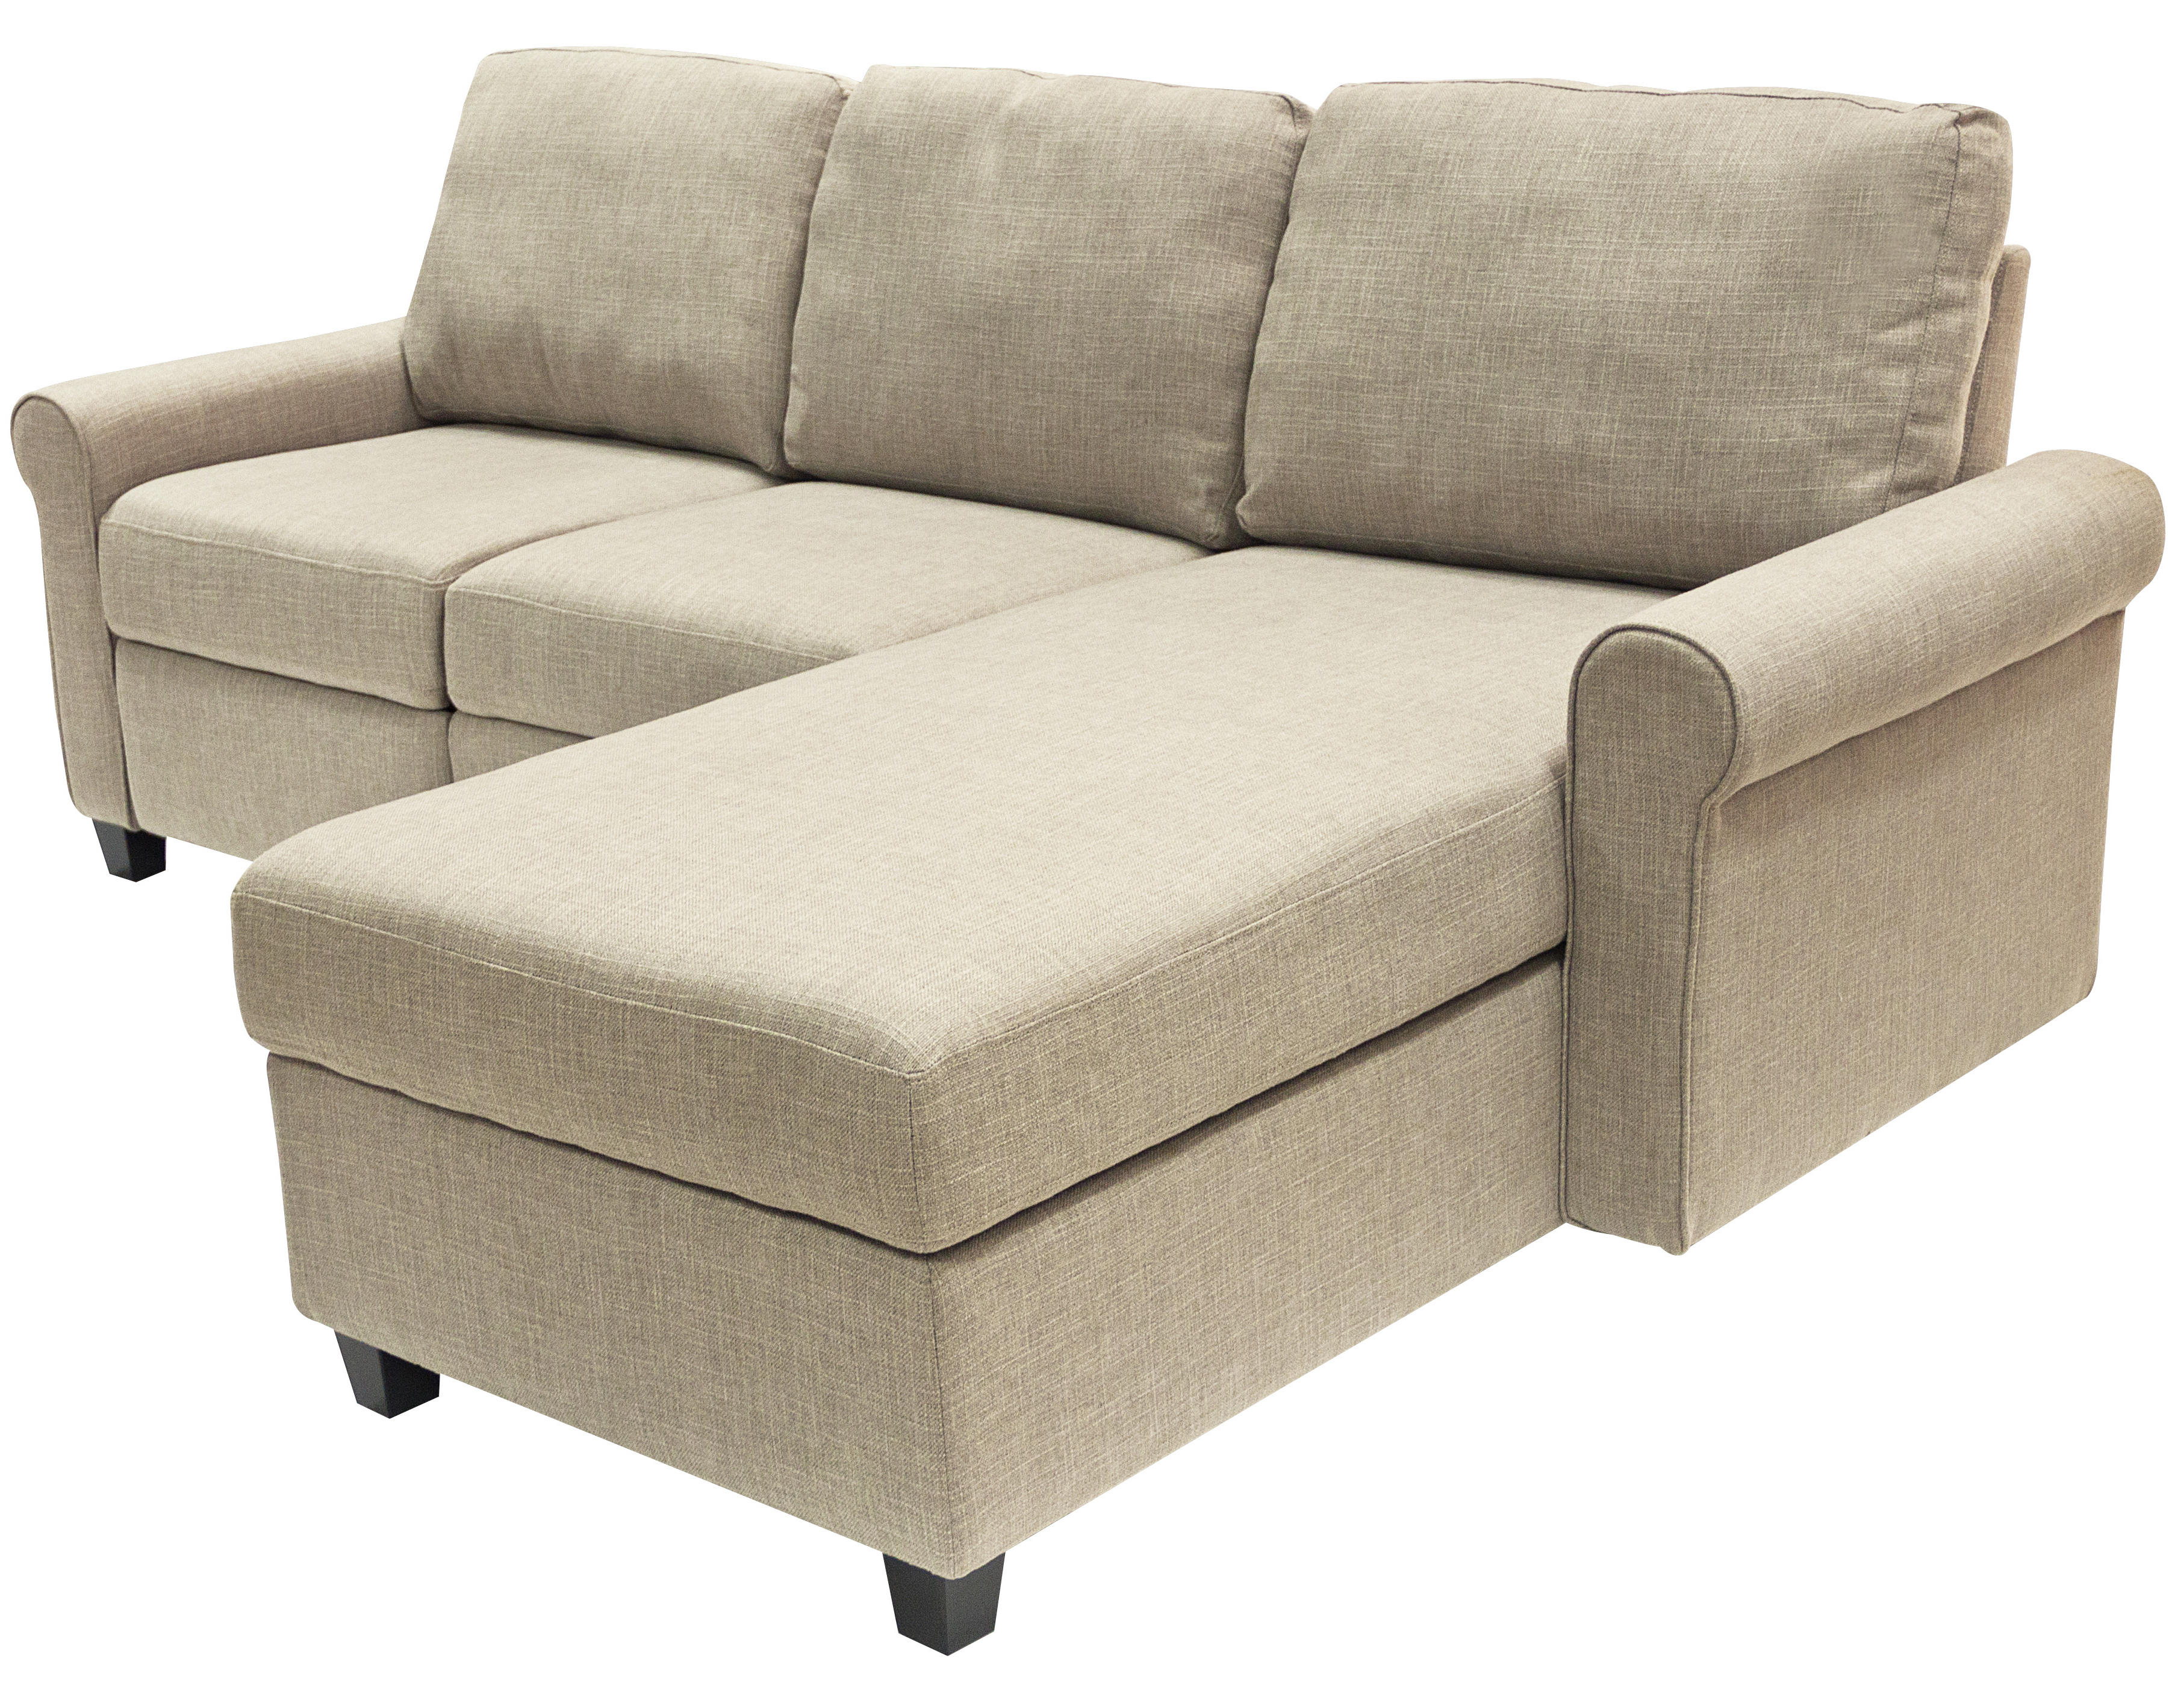 Serta Copenhagen Reclining Sectional with Right Storage Chaise - Oatmeal - image 5 of 9